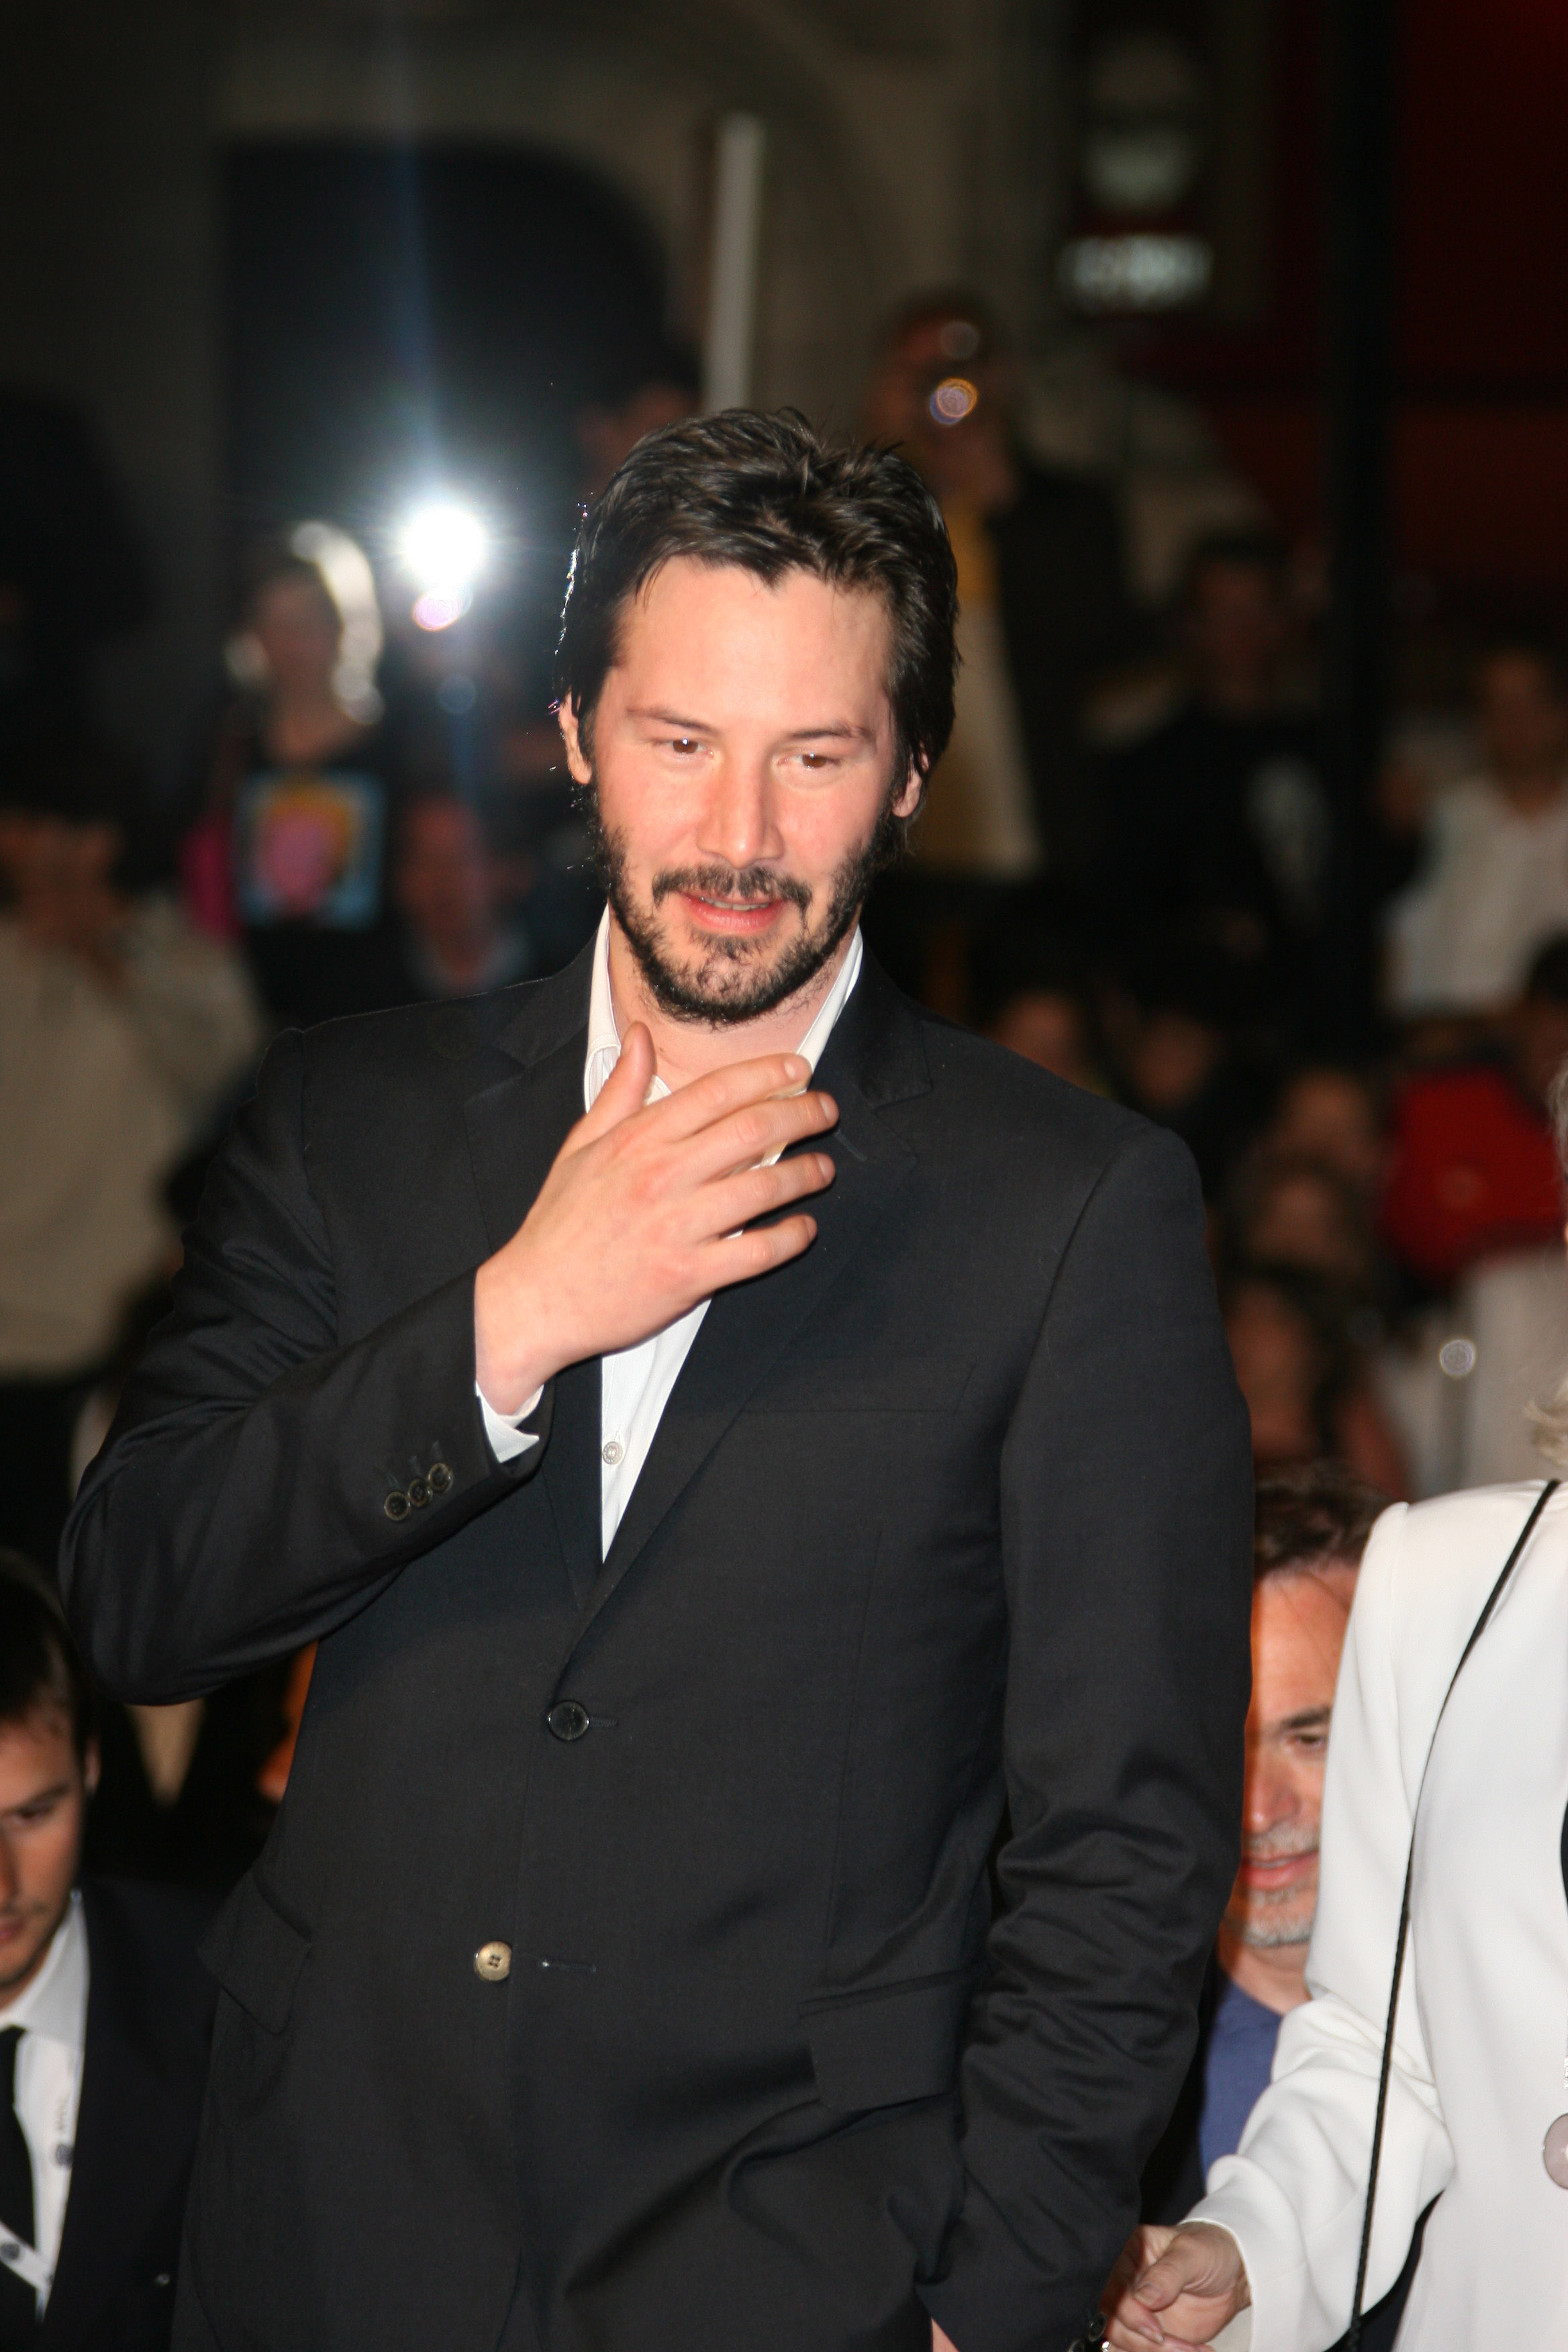 Keanu Reeves in Cannes, Frankreich, 2006 | Quelle: Getty Images